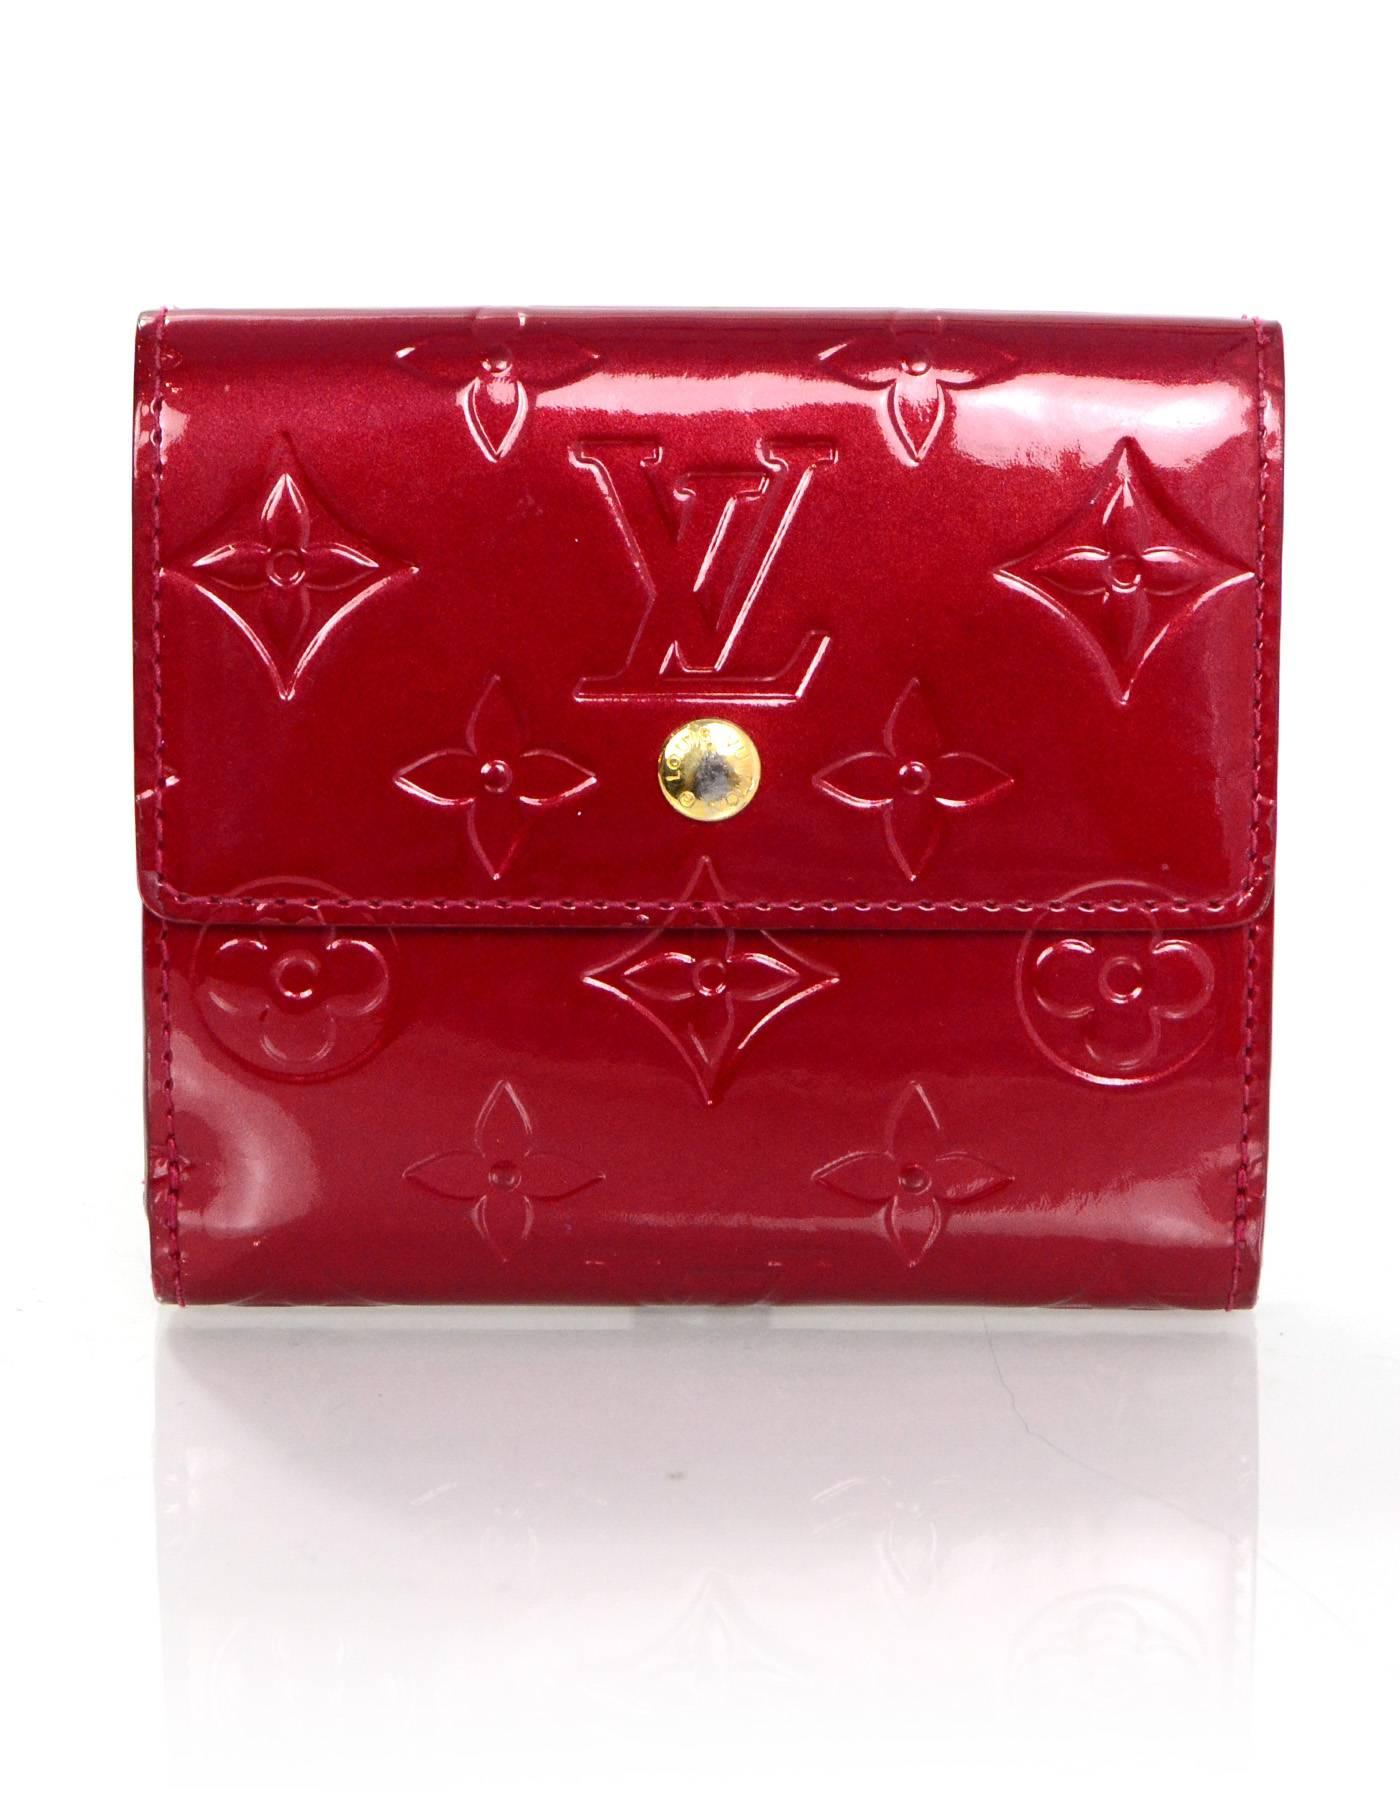 Louis Vuitton Red Pomme d'Amour Monogram Vernis Elise Wallet

Made In: France
Year of Production: 2006
Color: Red pomme d'amour
Hardware: Goldtone
Materials: Vernis leather
Lining: Red leather
Closure/Opening: Double sided with two flap top and snap